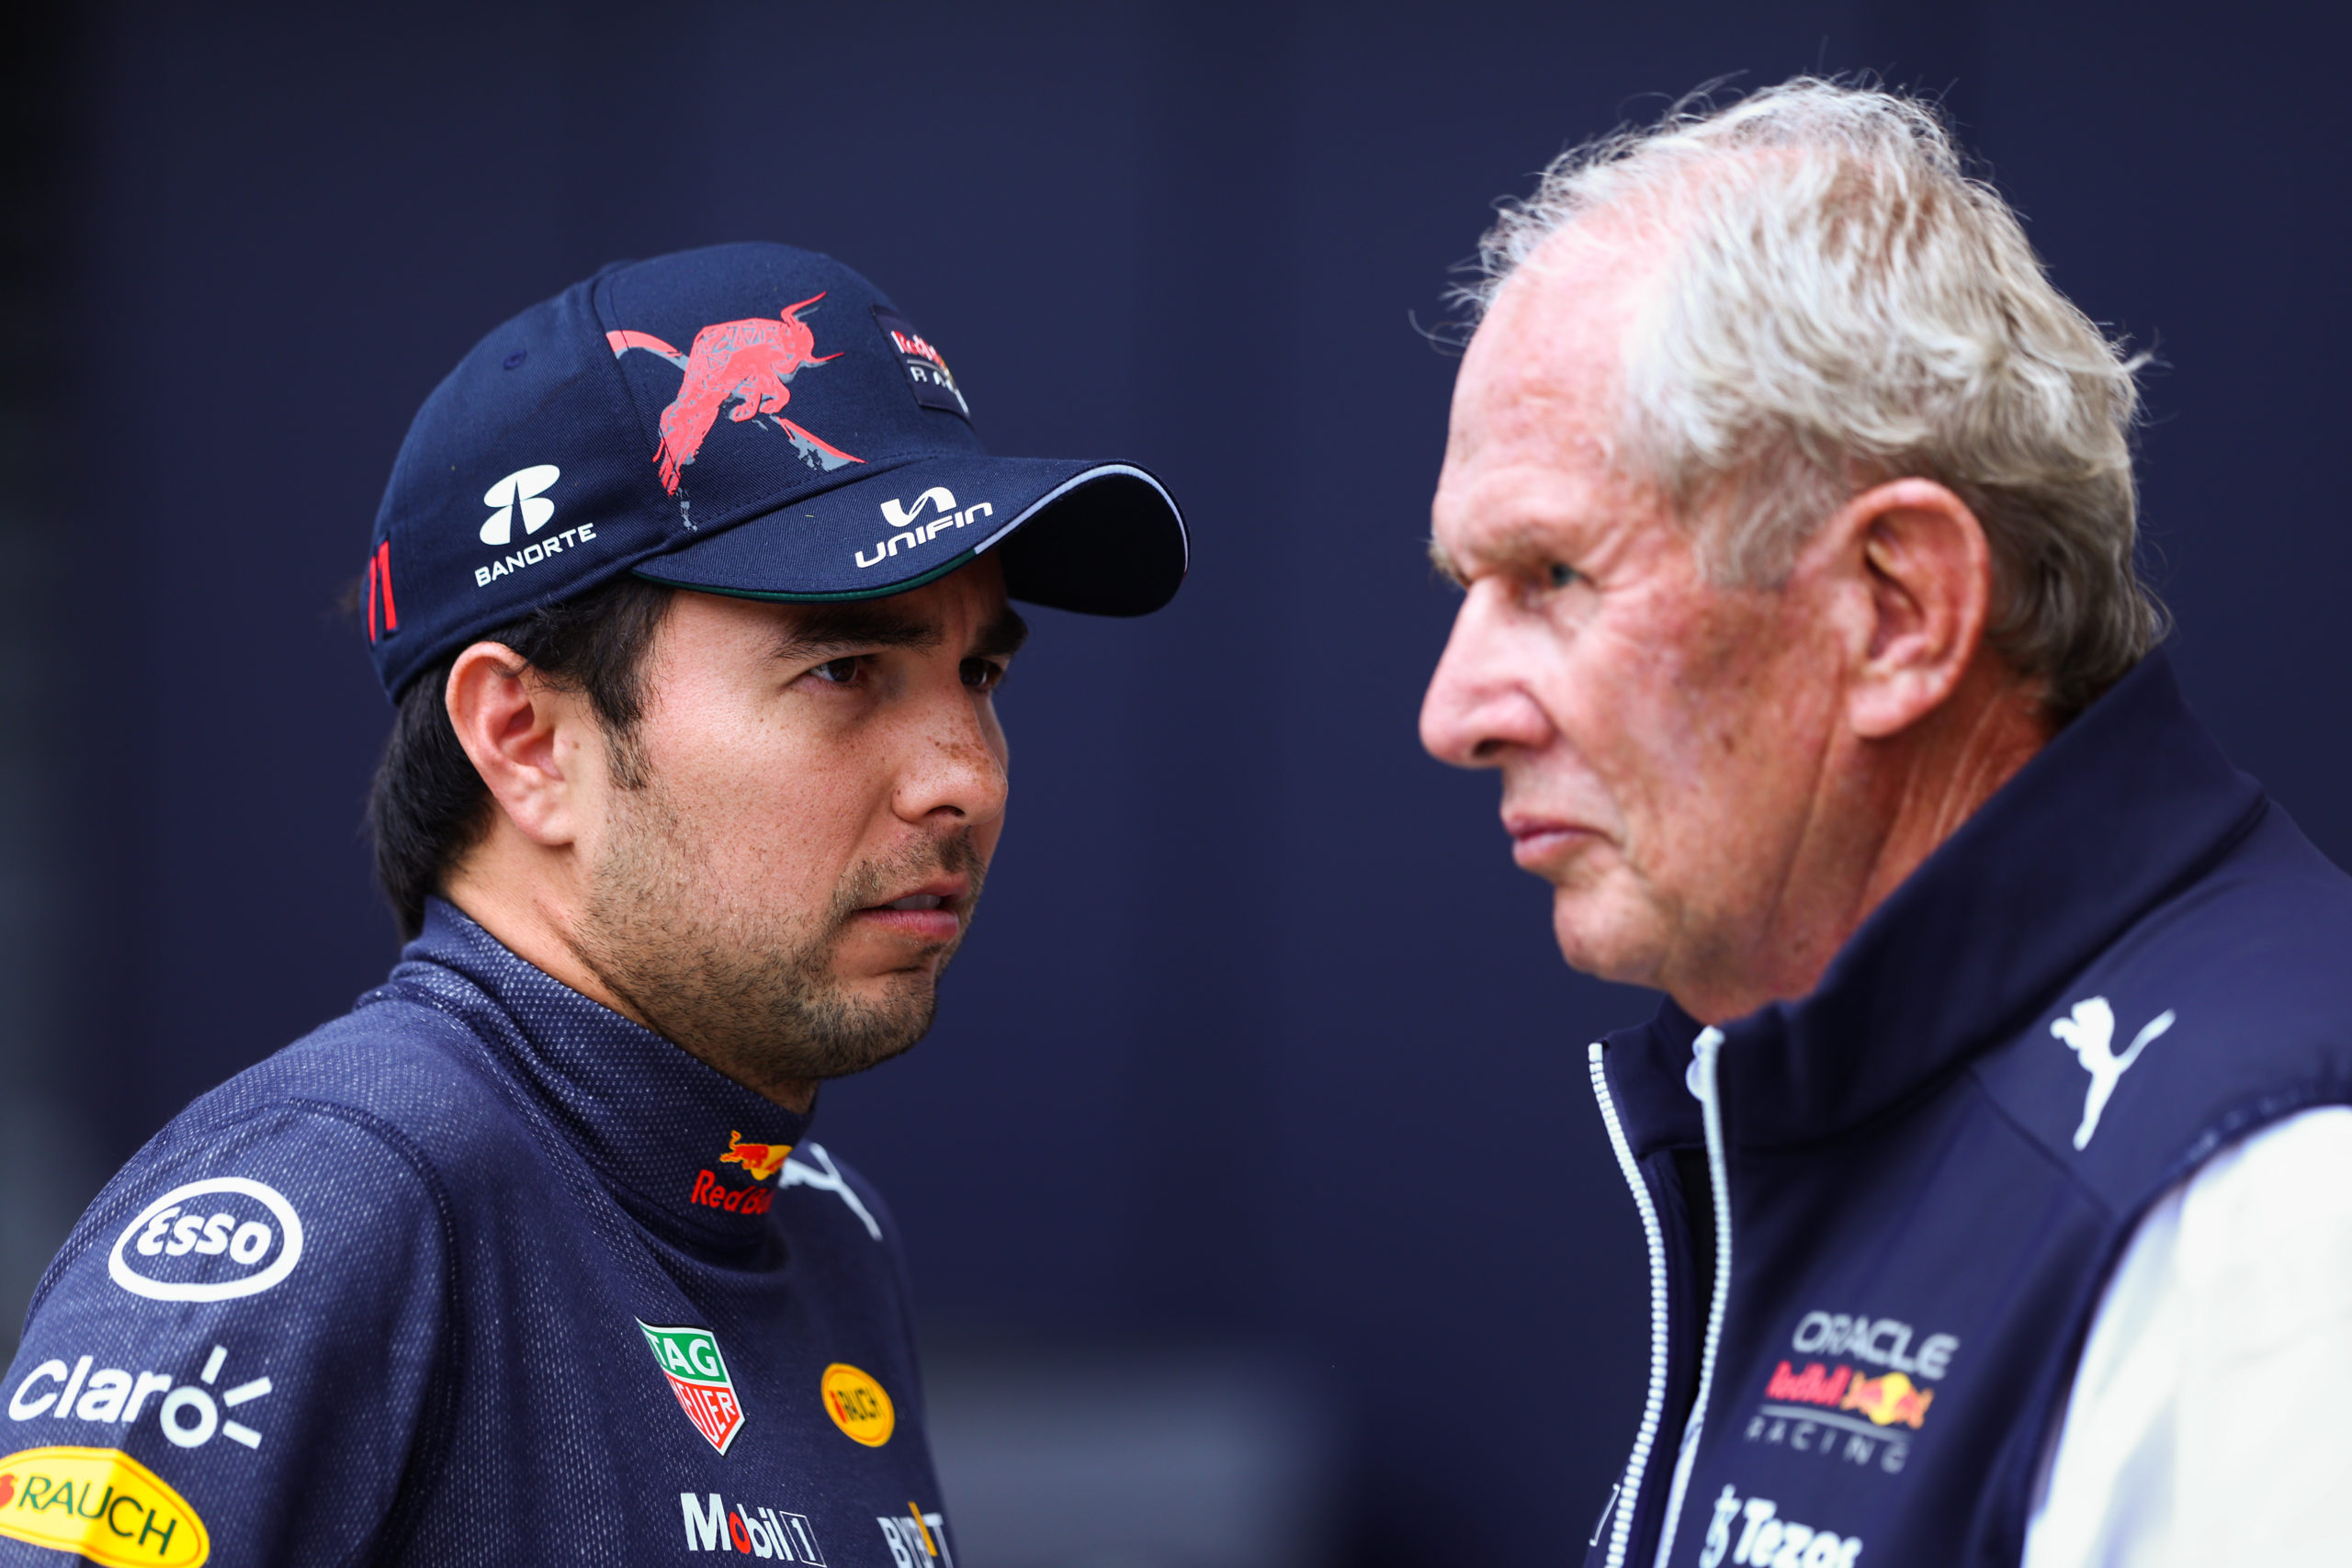 Helmut Marko apologizes for prejudicial statement about Peres